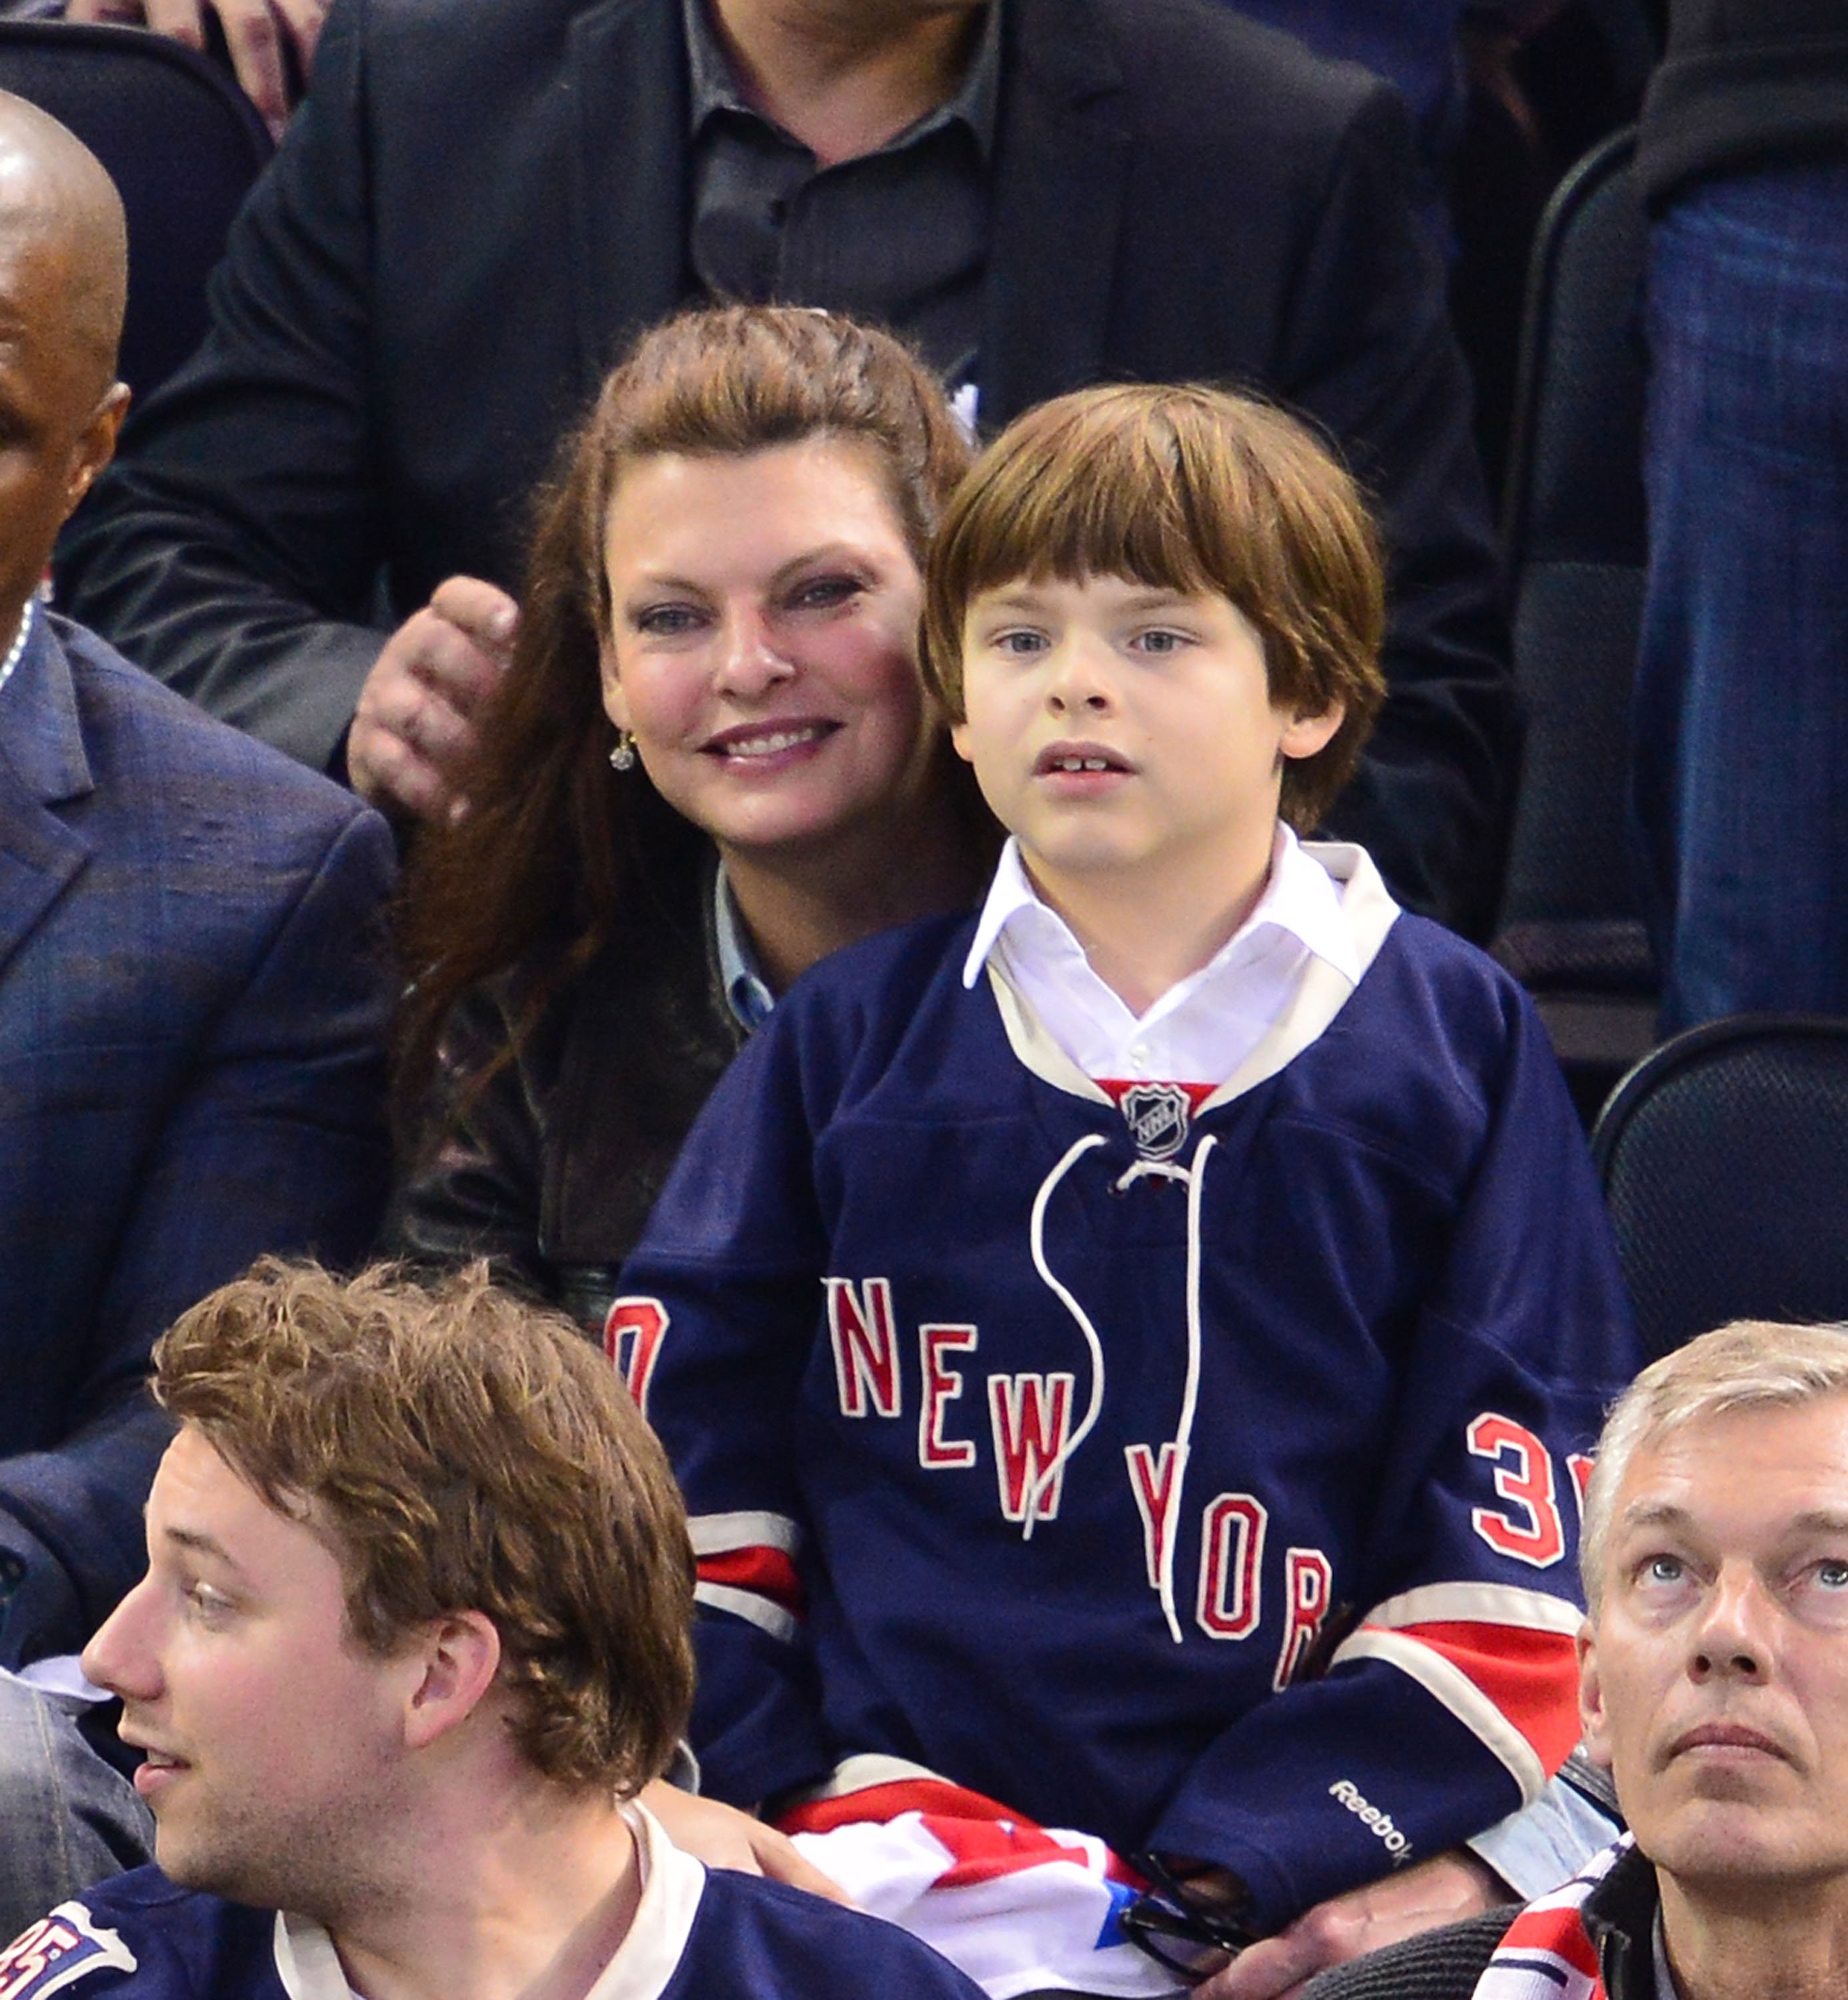 Linda Evangelista and Augustin James Evangelista at the Montreal Canadiens vs. New York Rangers playoff game on May 29, 2014 | Source: Getty Images